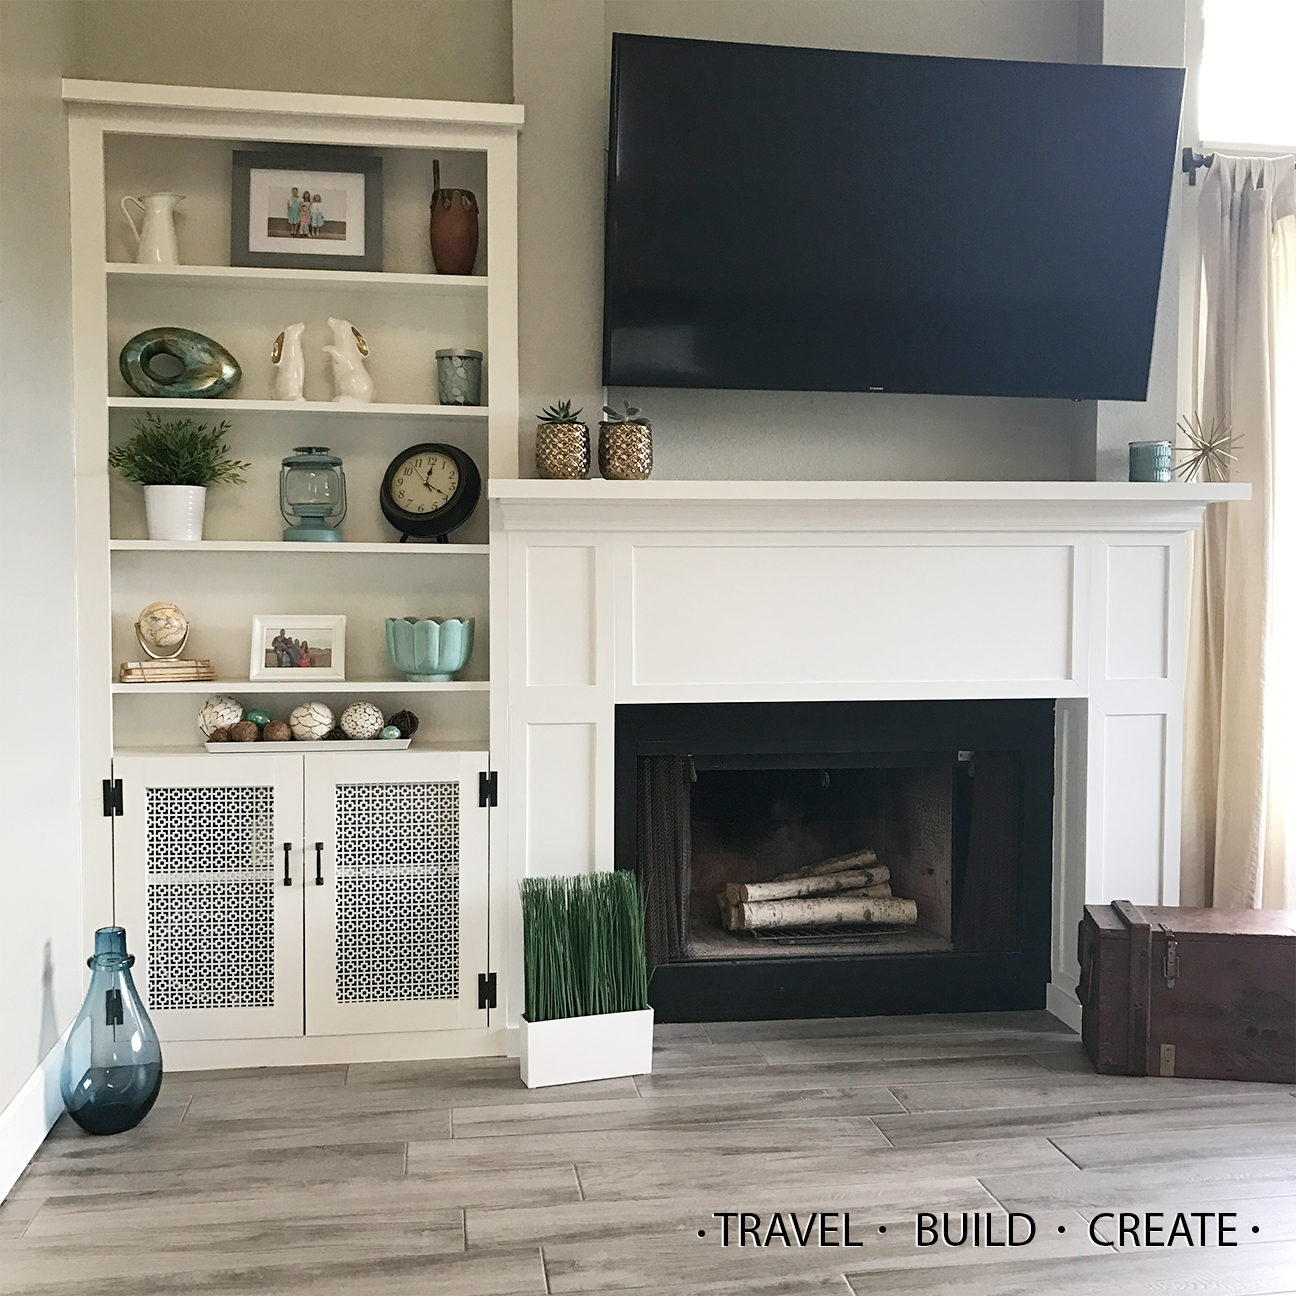 Diy Fireplace Surround And Built In, Diy Bookshelves On Each Side Of Fireplace